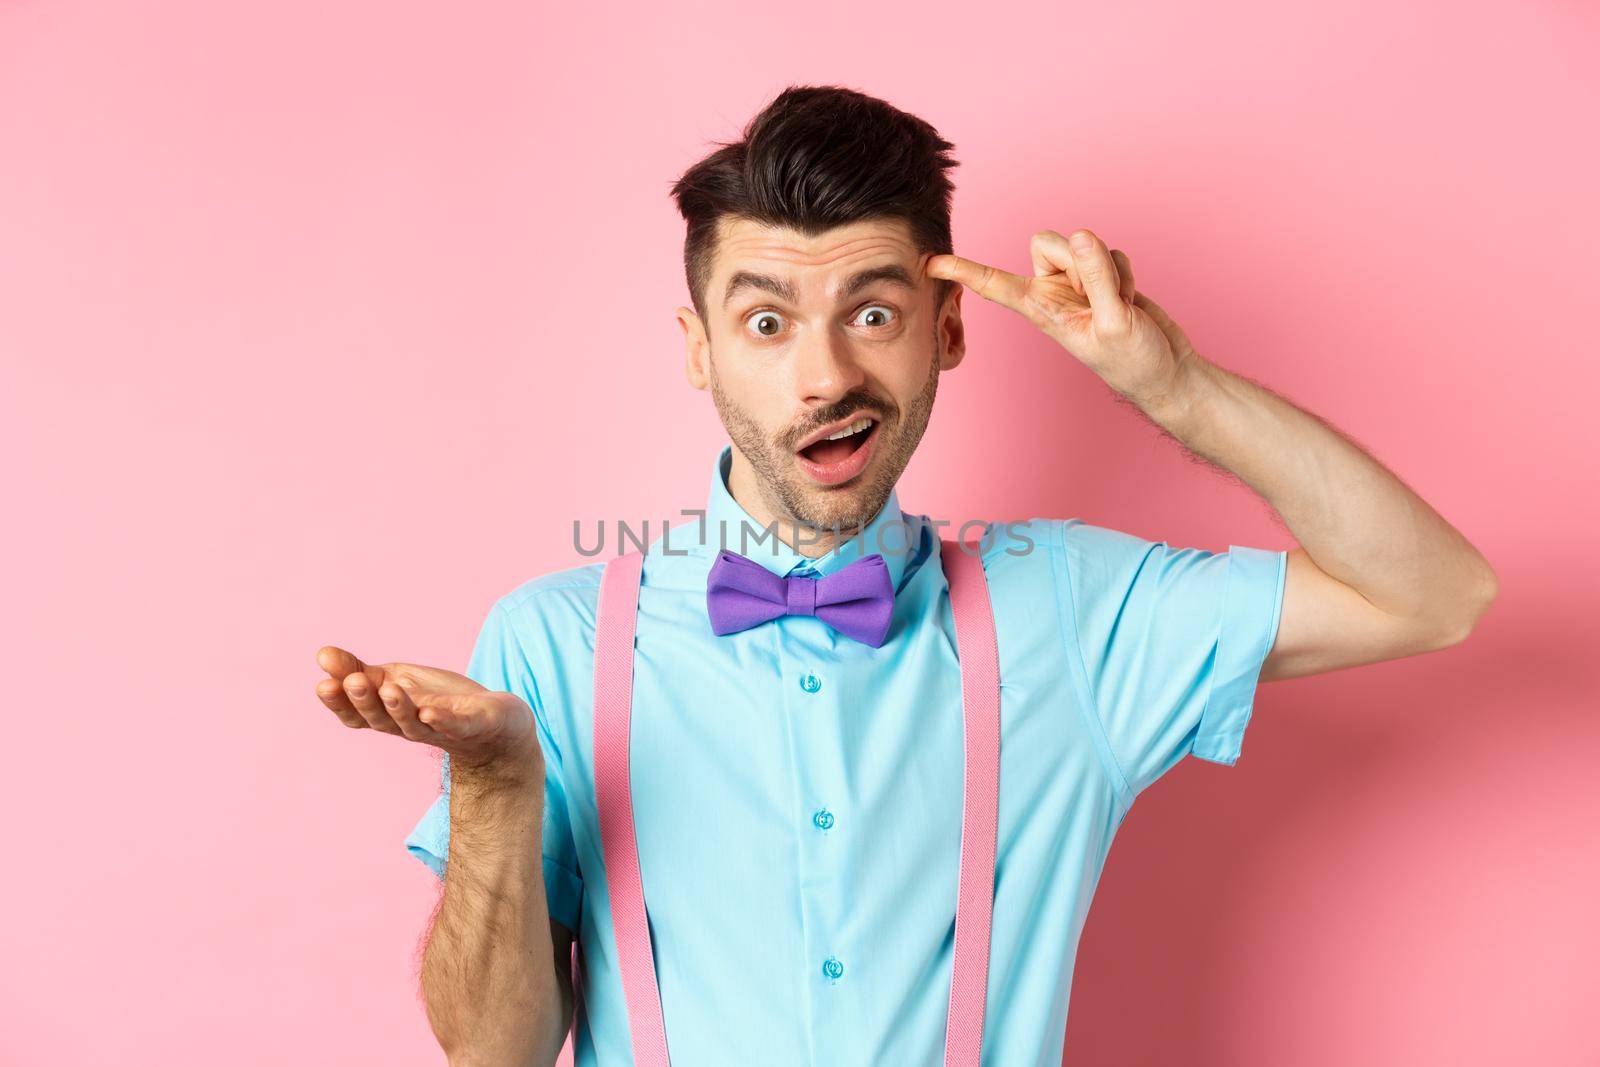 Annoyed guy mocking someone stupid, pointing finger at head and camera, are you stupid gesture, standing over pink background.